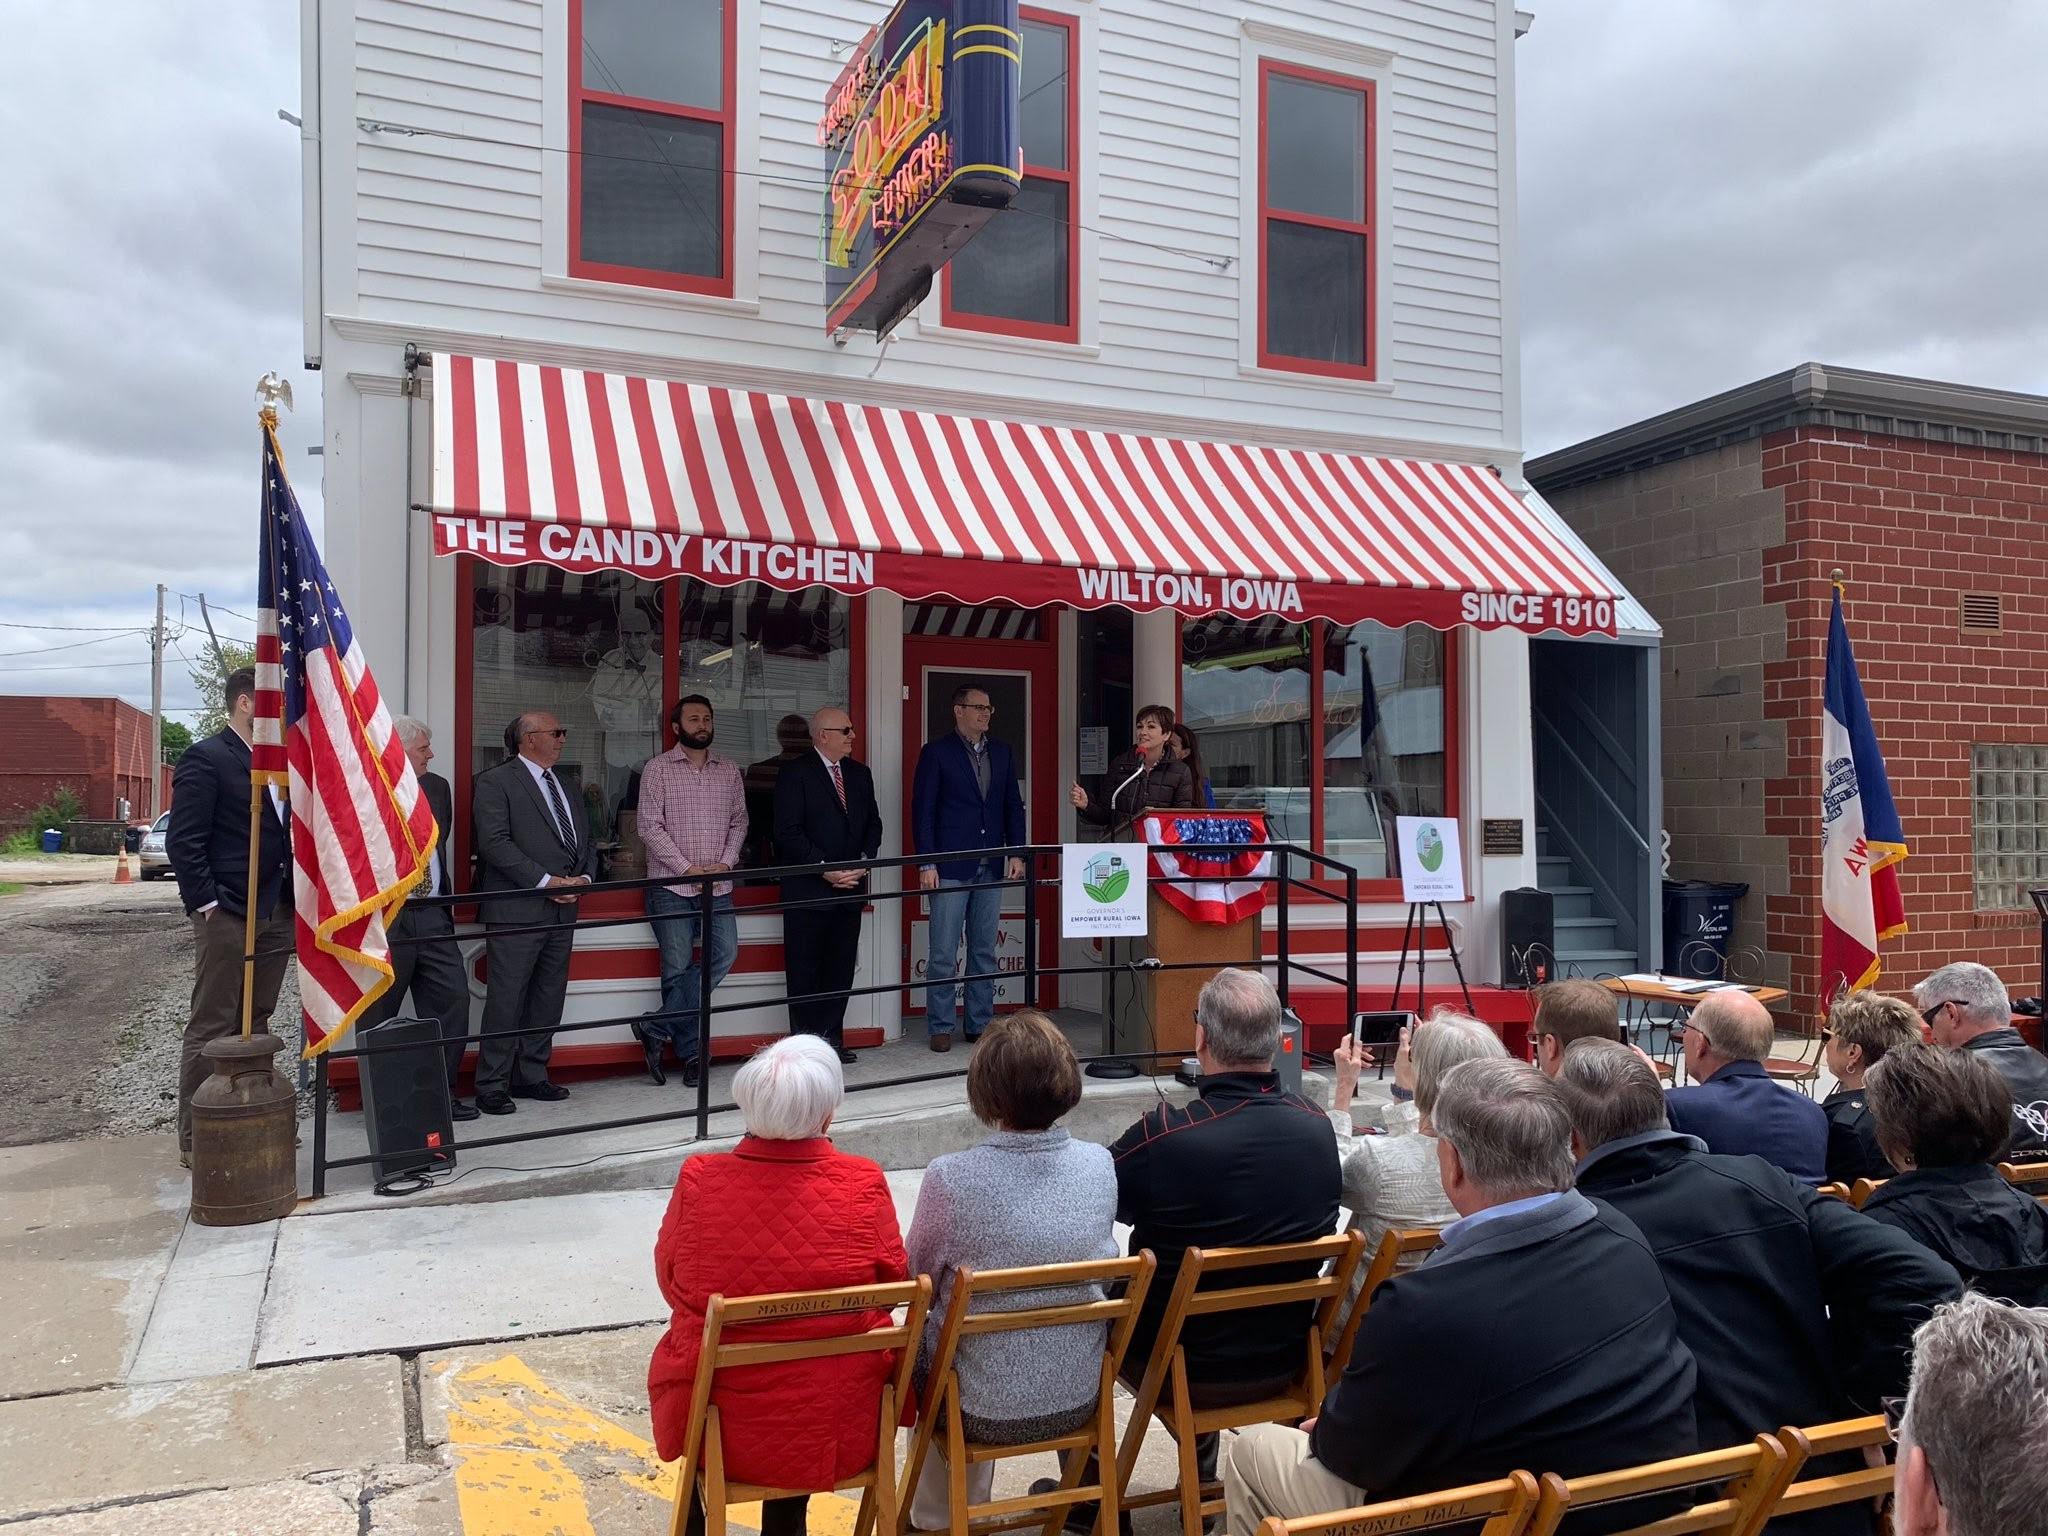 A small crowd watches a press conference featuring Governor Kim Reynolds on the storefront of The Candy Kitchen in Wilton, Iowa.